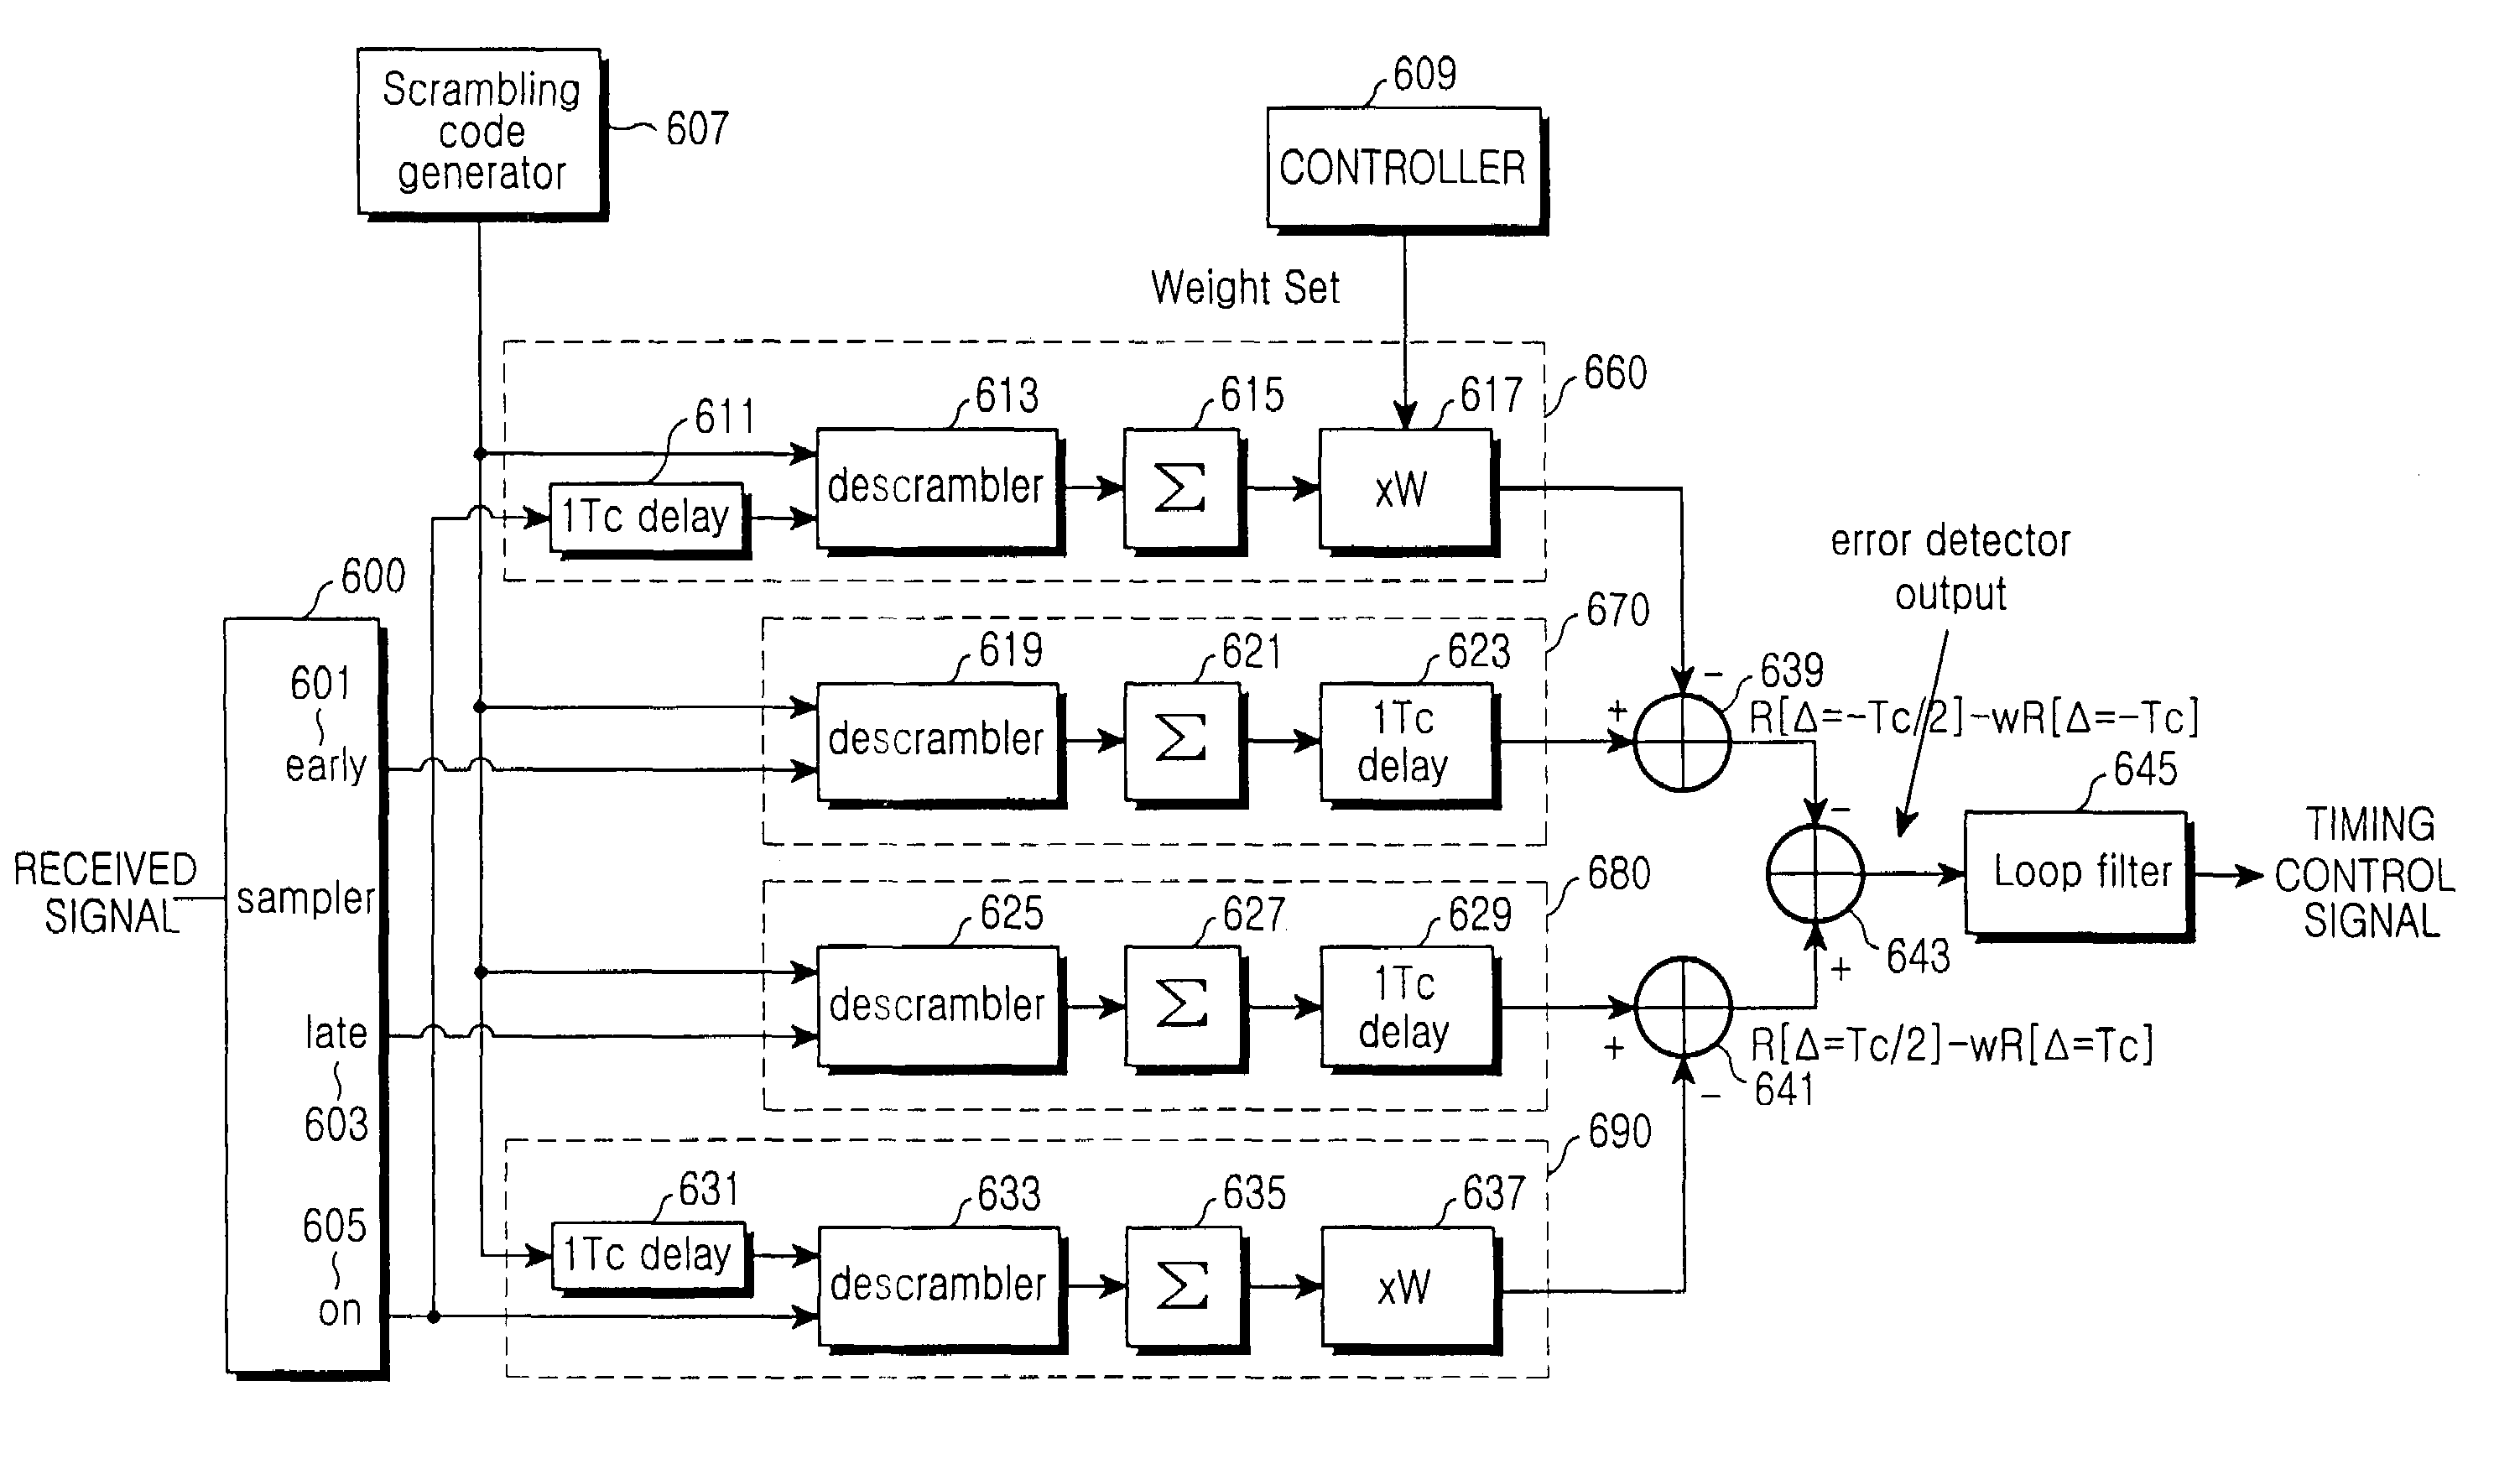 Code tracking apparatus and method under a multi-path environment in a DS-CDMA communication system